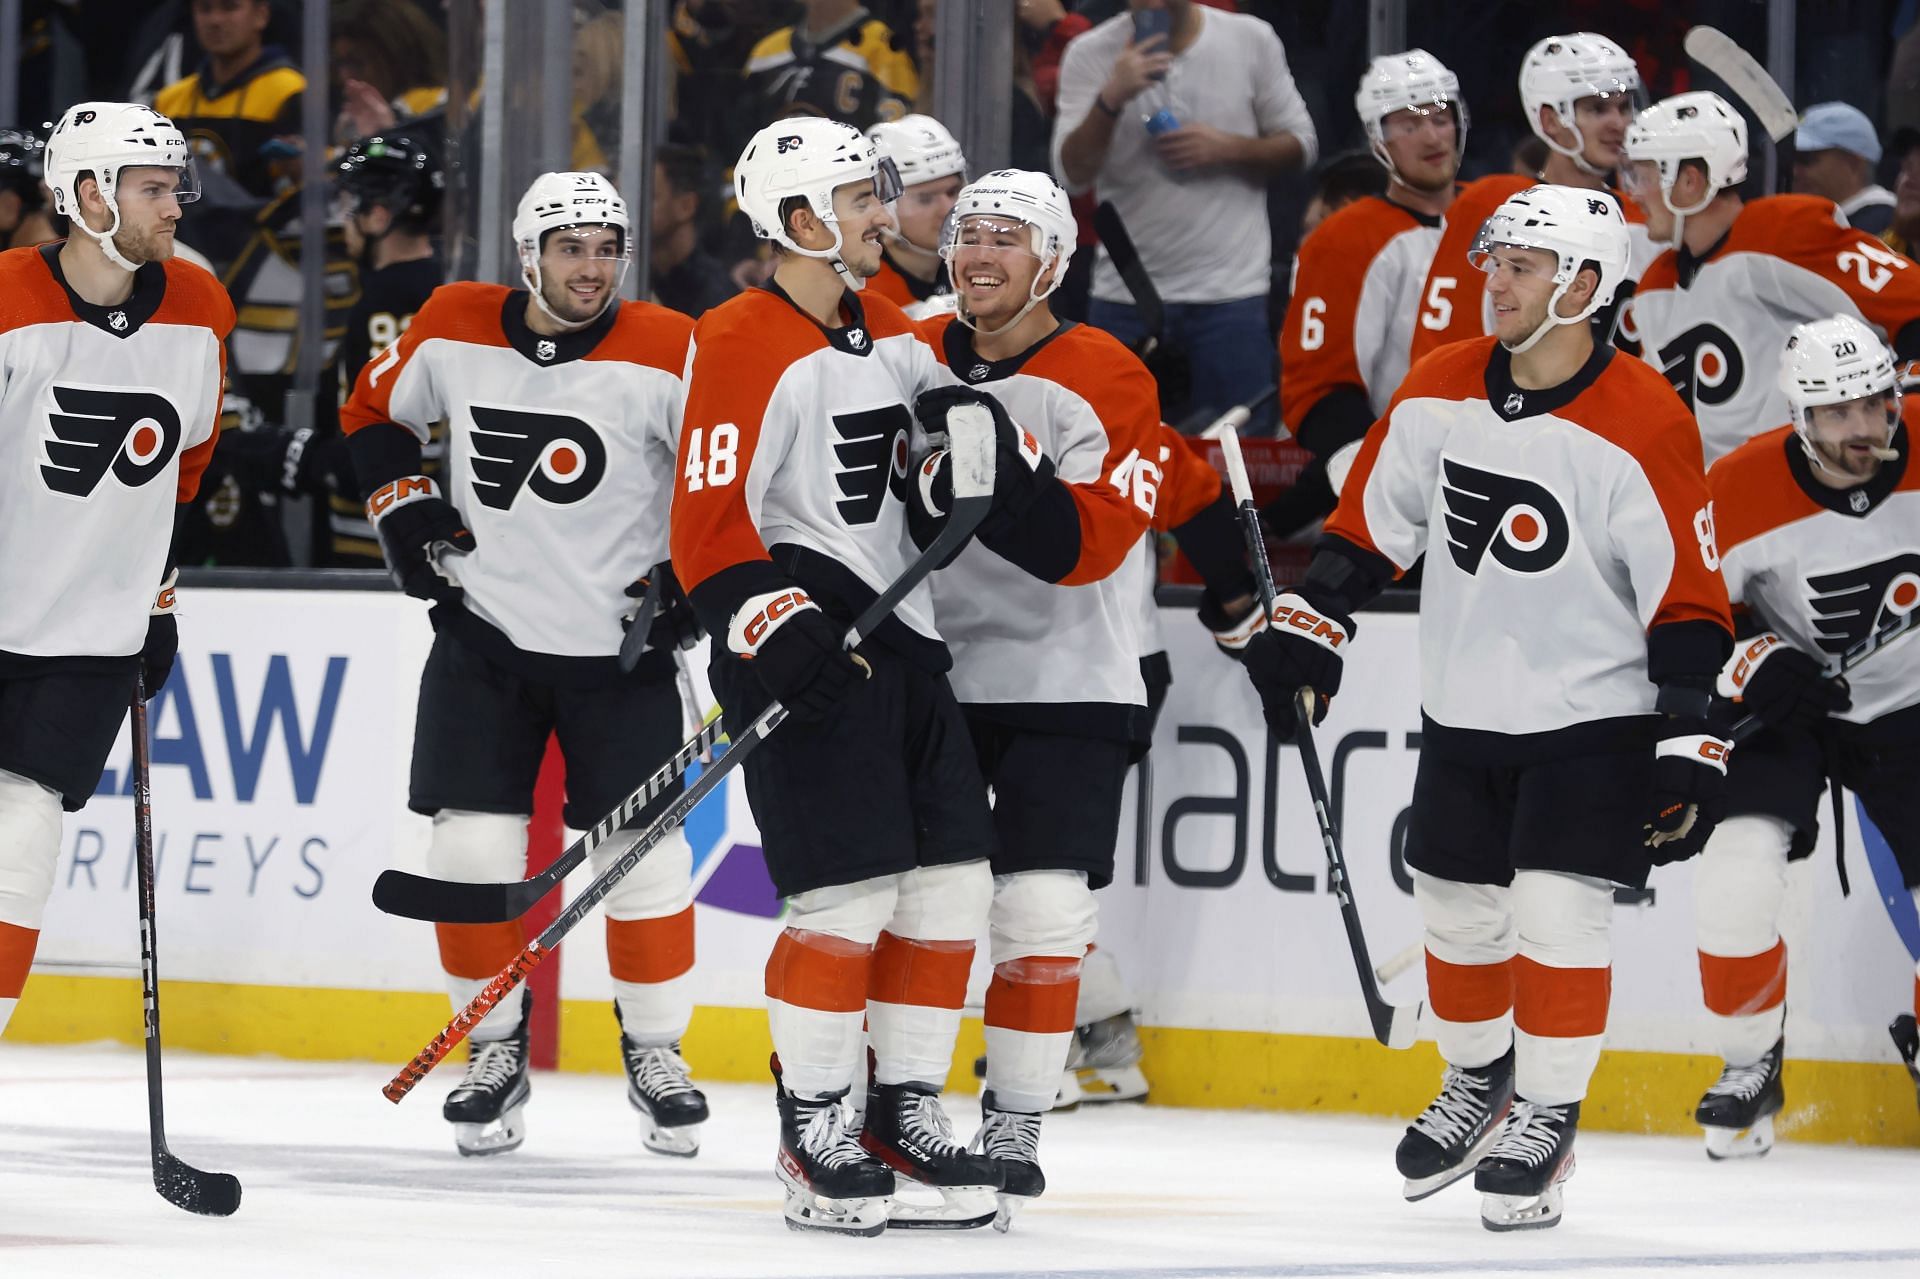 PHILADELPHIA FLYERS NHL HOCKEY TEAM FUELED BY PHILLY SMARTWATER